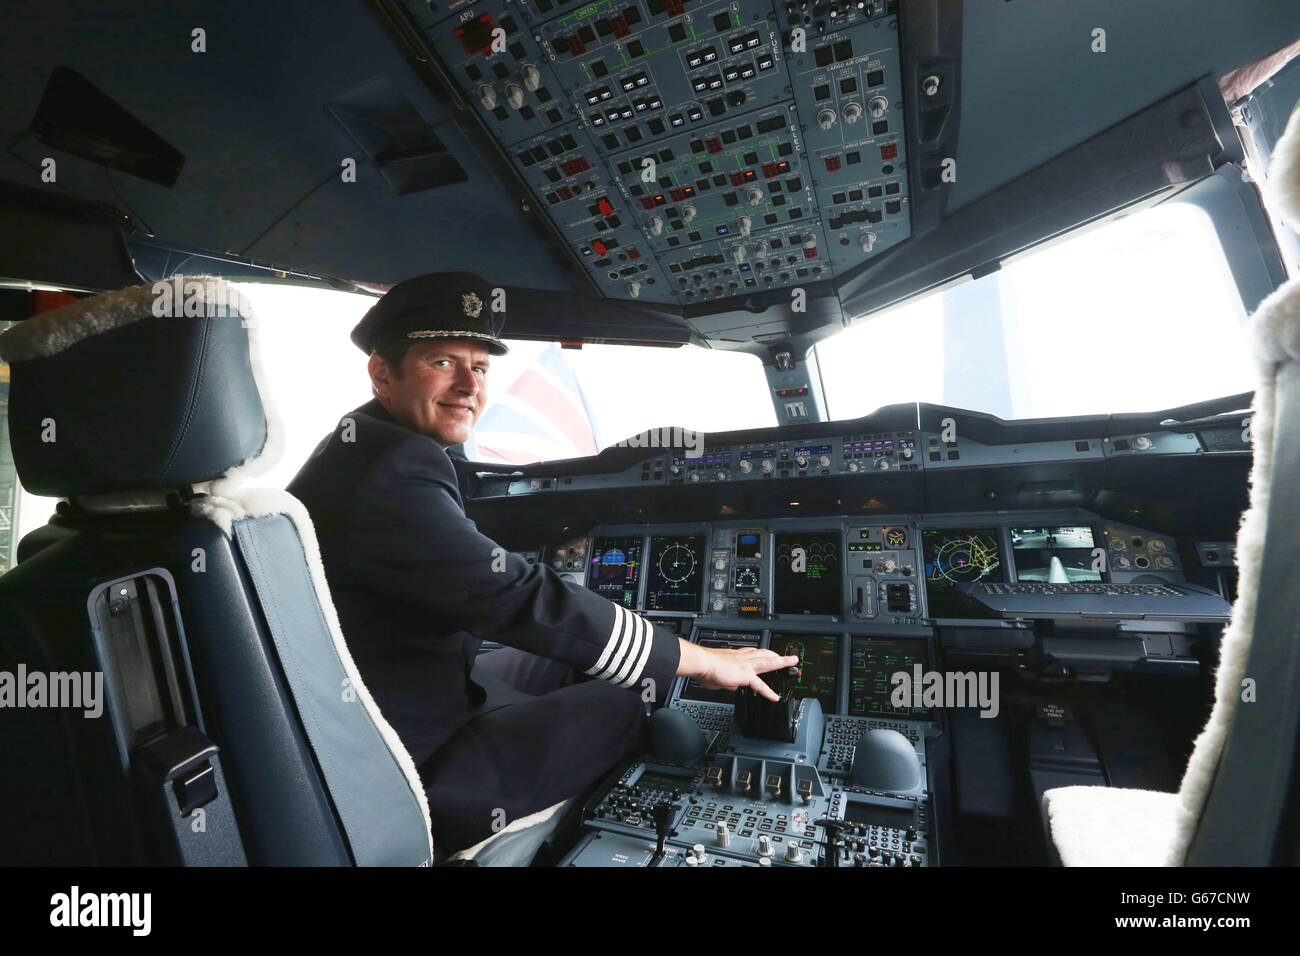 British Airways Captain Mike Blythe on the flight deck of a British Airways Airbus A380, the world's largest passenger plane, after it arrived at Heathrow Airport, as BA became the first UK airline to take delivery of the massive superjumbo. Stock Photo